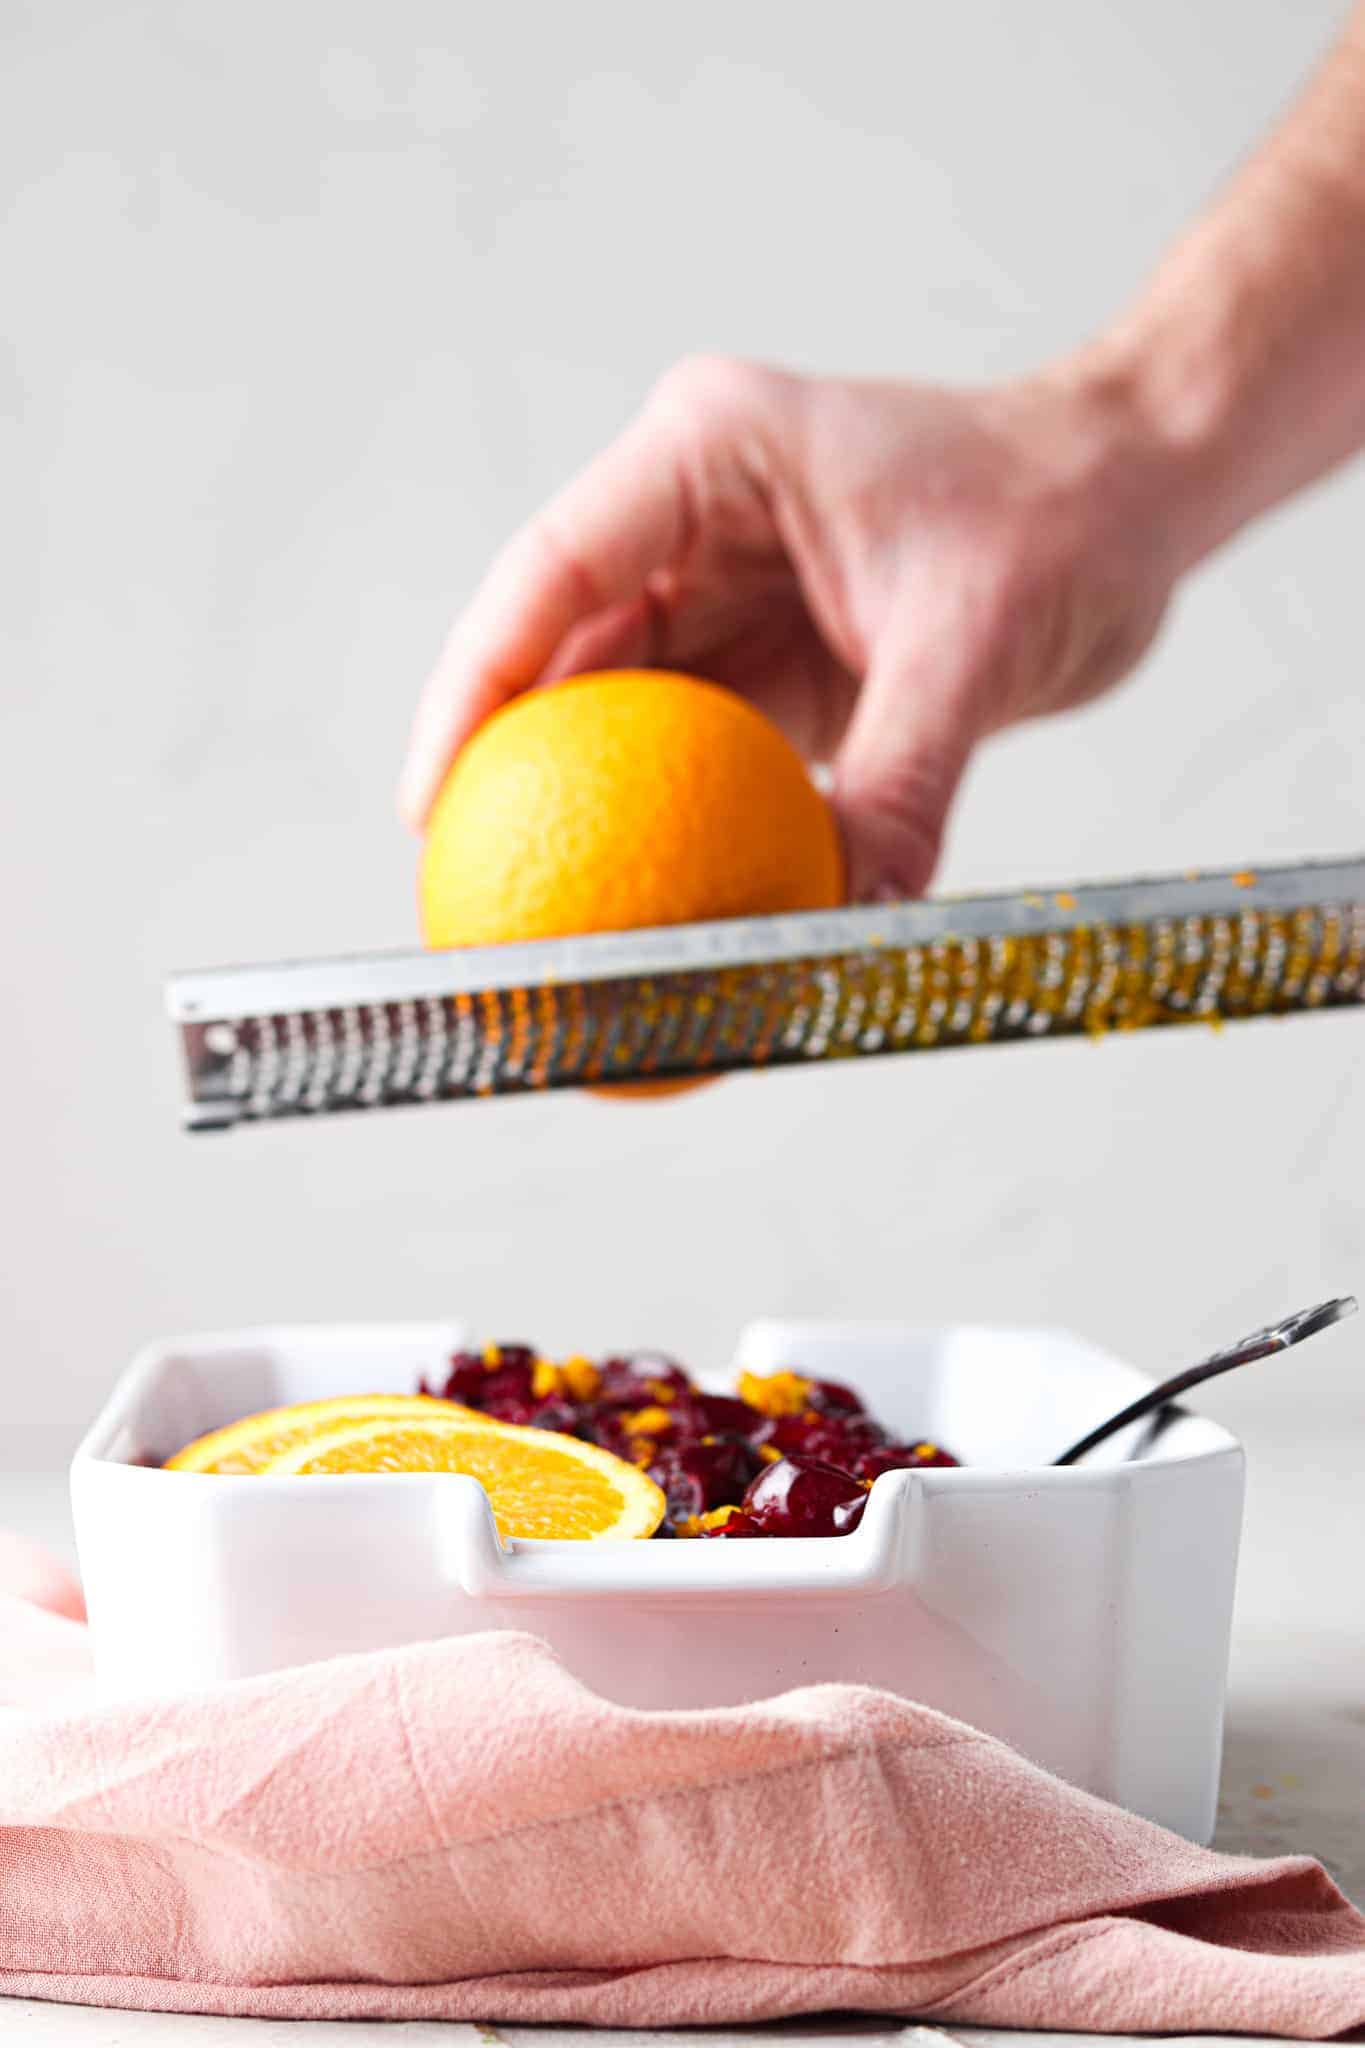 Hand holding an orange zesting it over a lemon zester over a white casserole dish filled with cooked cranberry sauce.